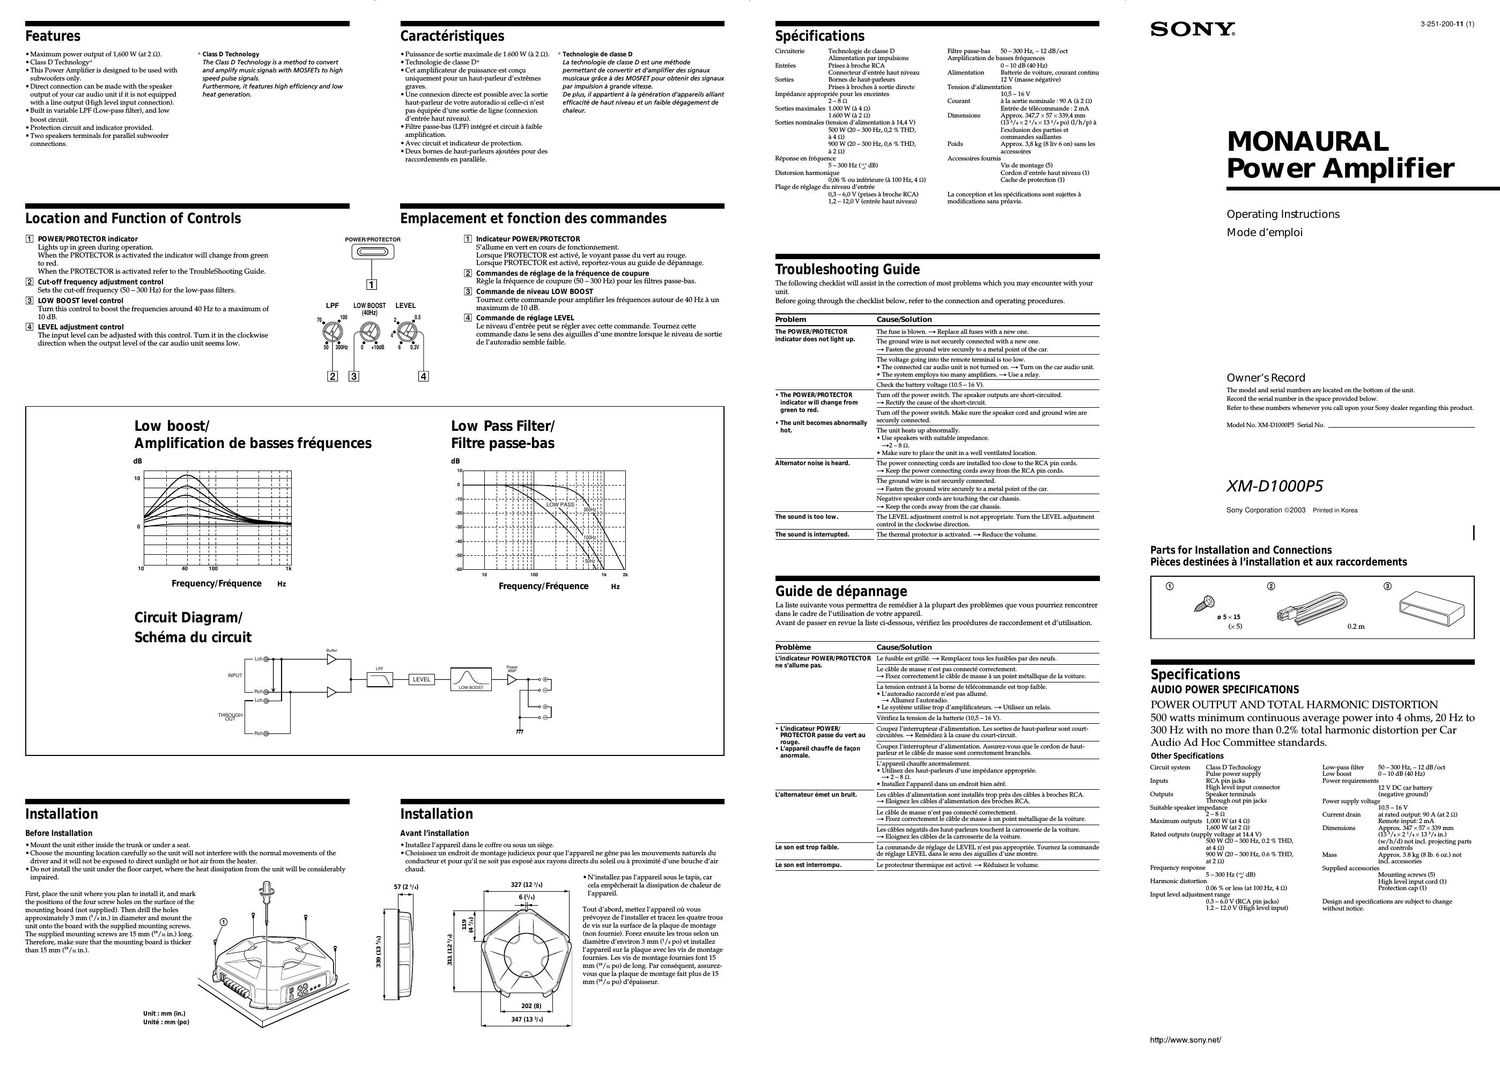 sony xmd 1000 p 5 owners manual